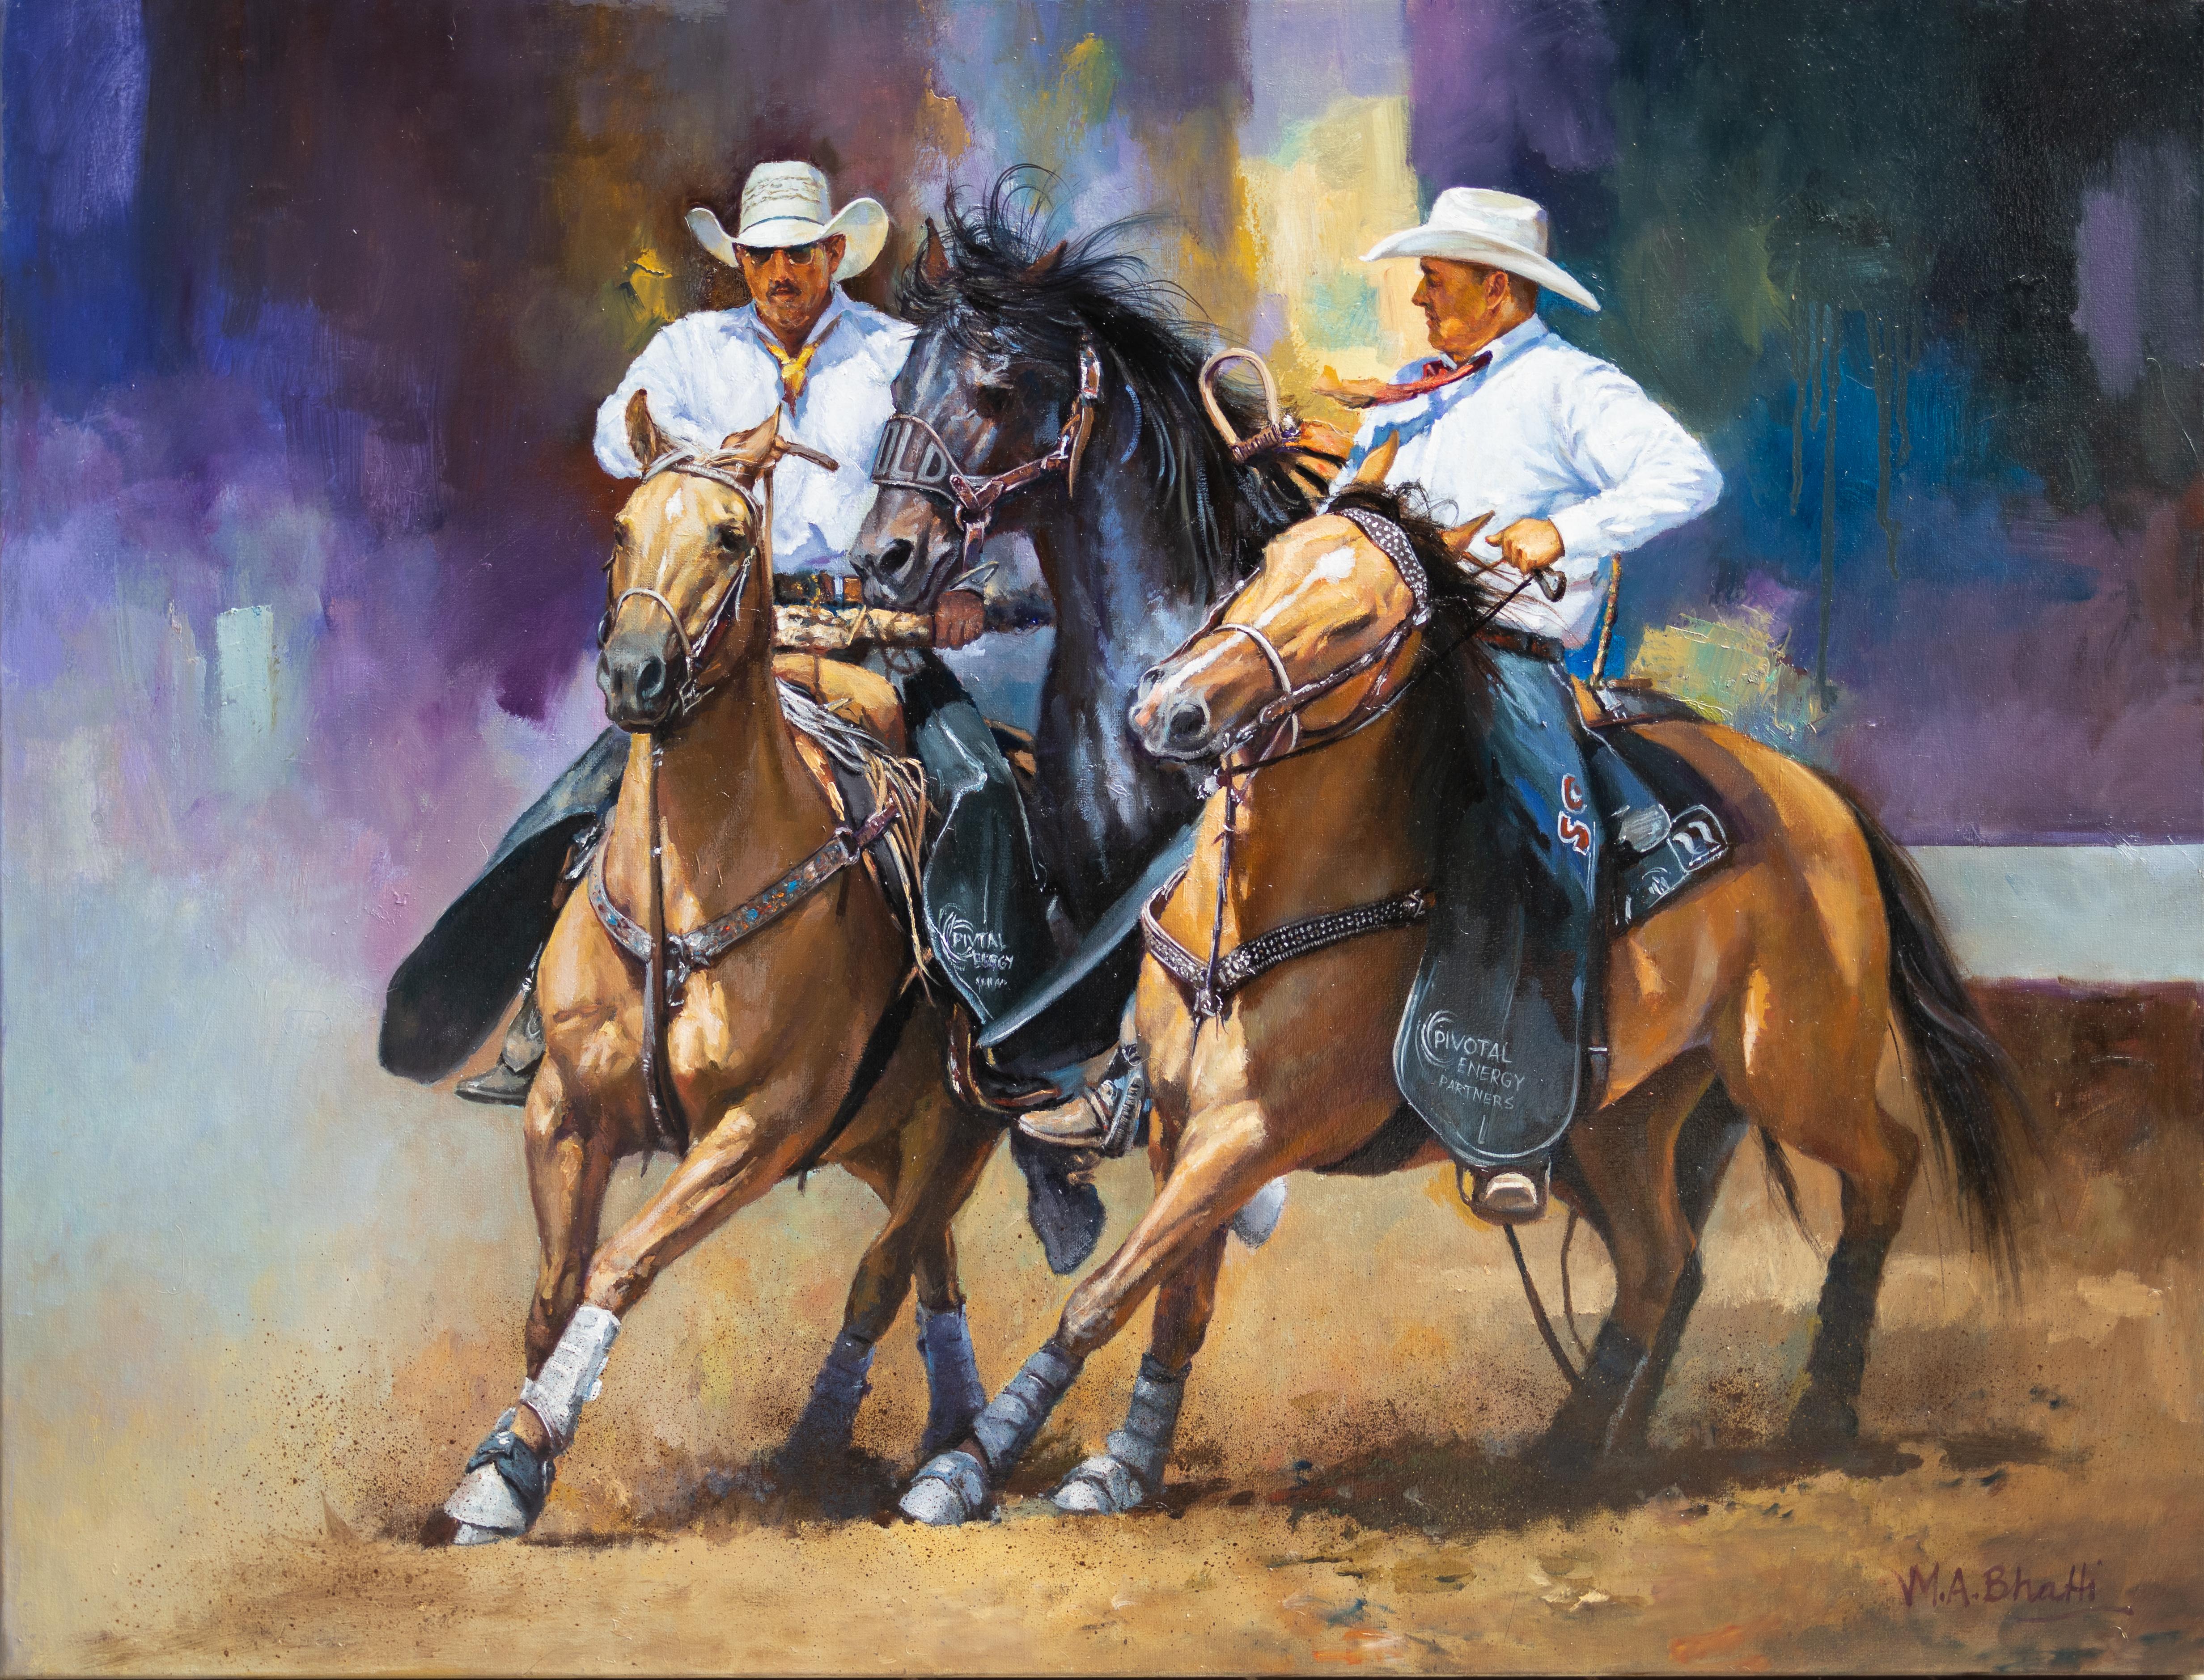 M.A. Bhatti Figurative Painting - "Chasing Down the Beauty", Western Rodeo Scene, Oil on Canvas